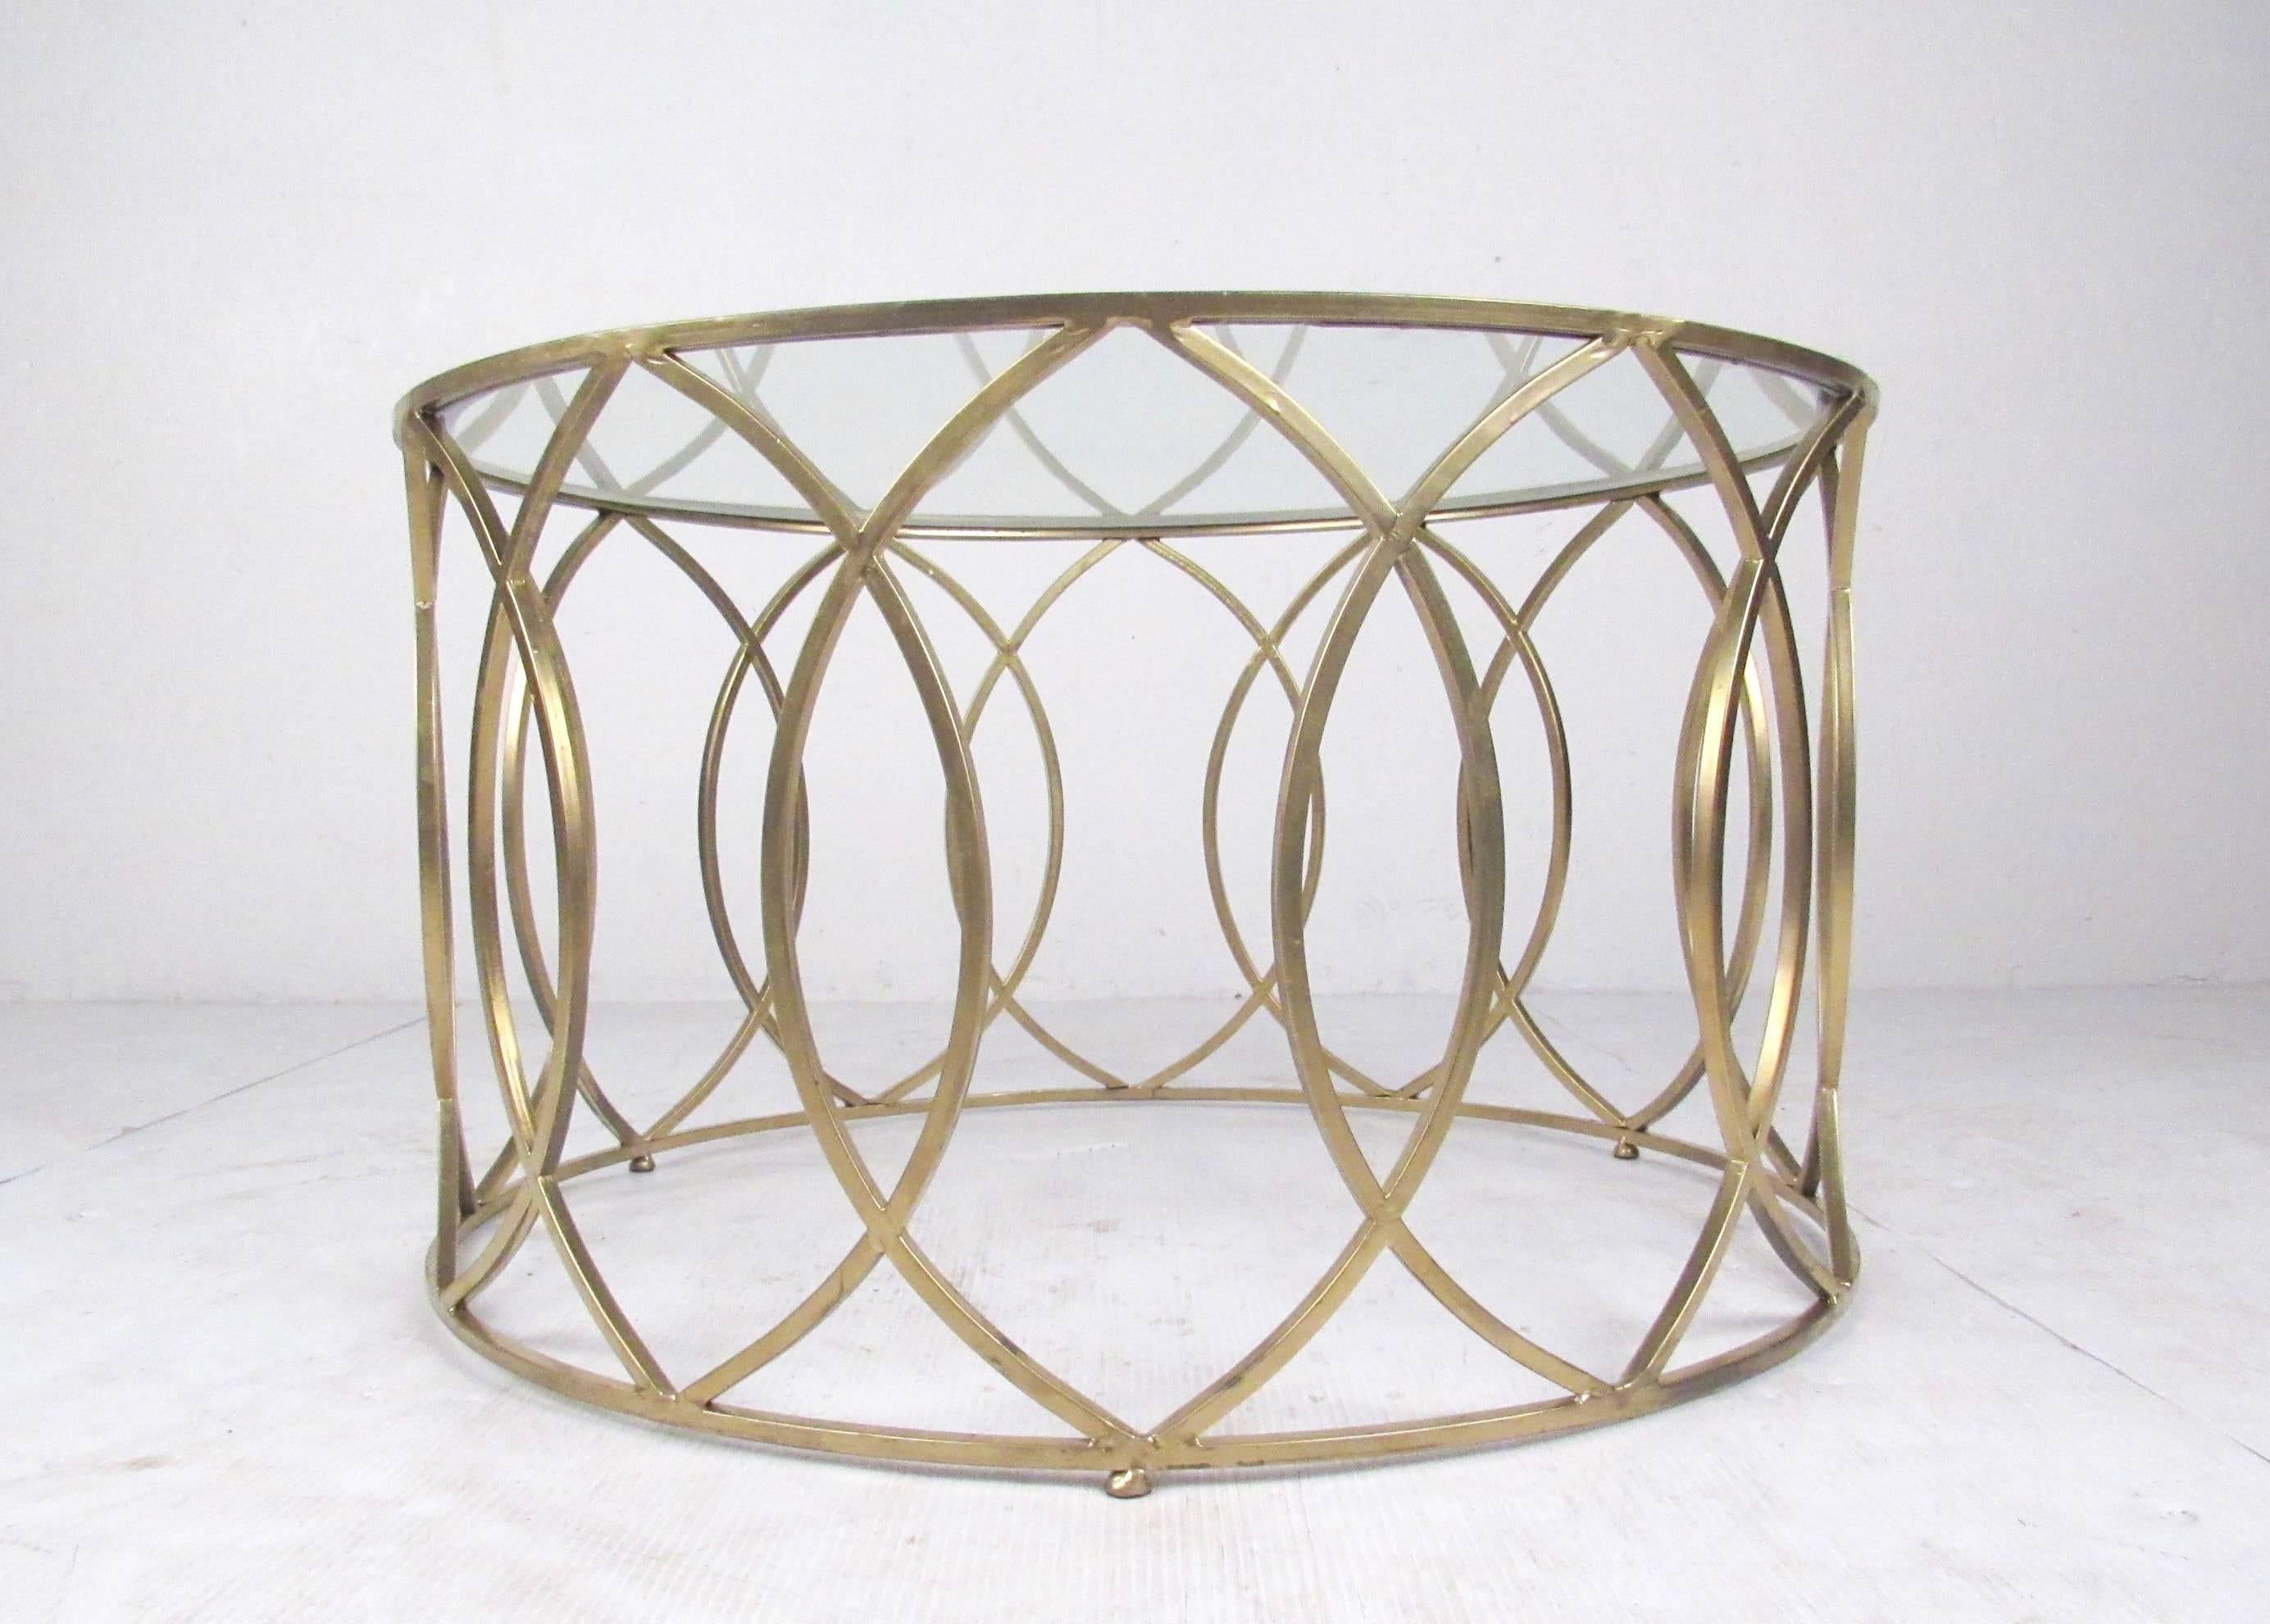 This unique decorator style coffee table features Hollywood Regency appeal with a gold colored finish and unique geometric design. Beveled glass top and multi-functional size make this modern coffee or end table an elegant addition to home or